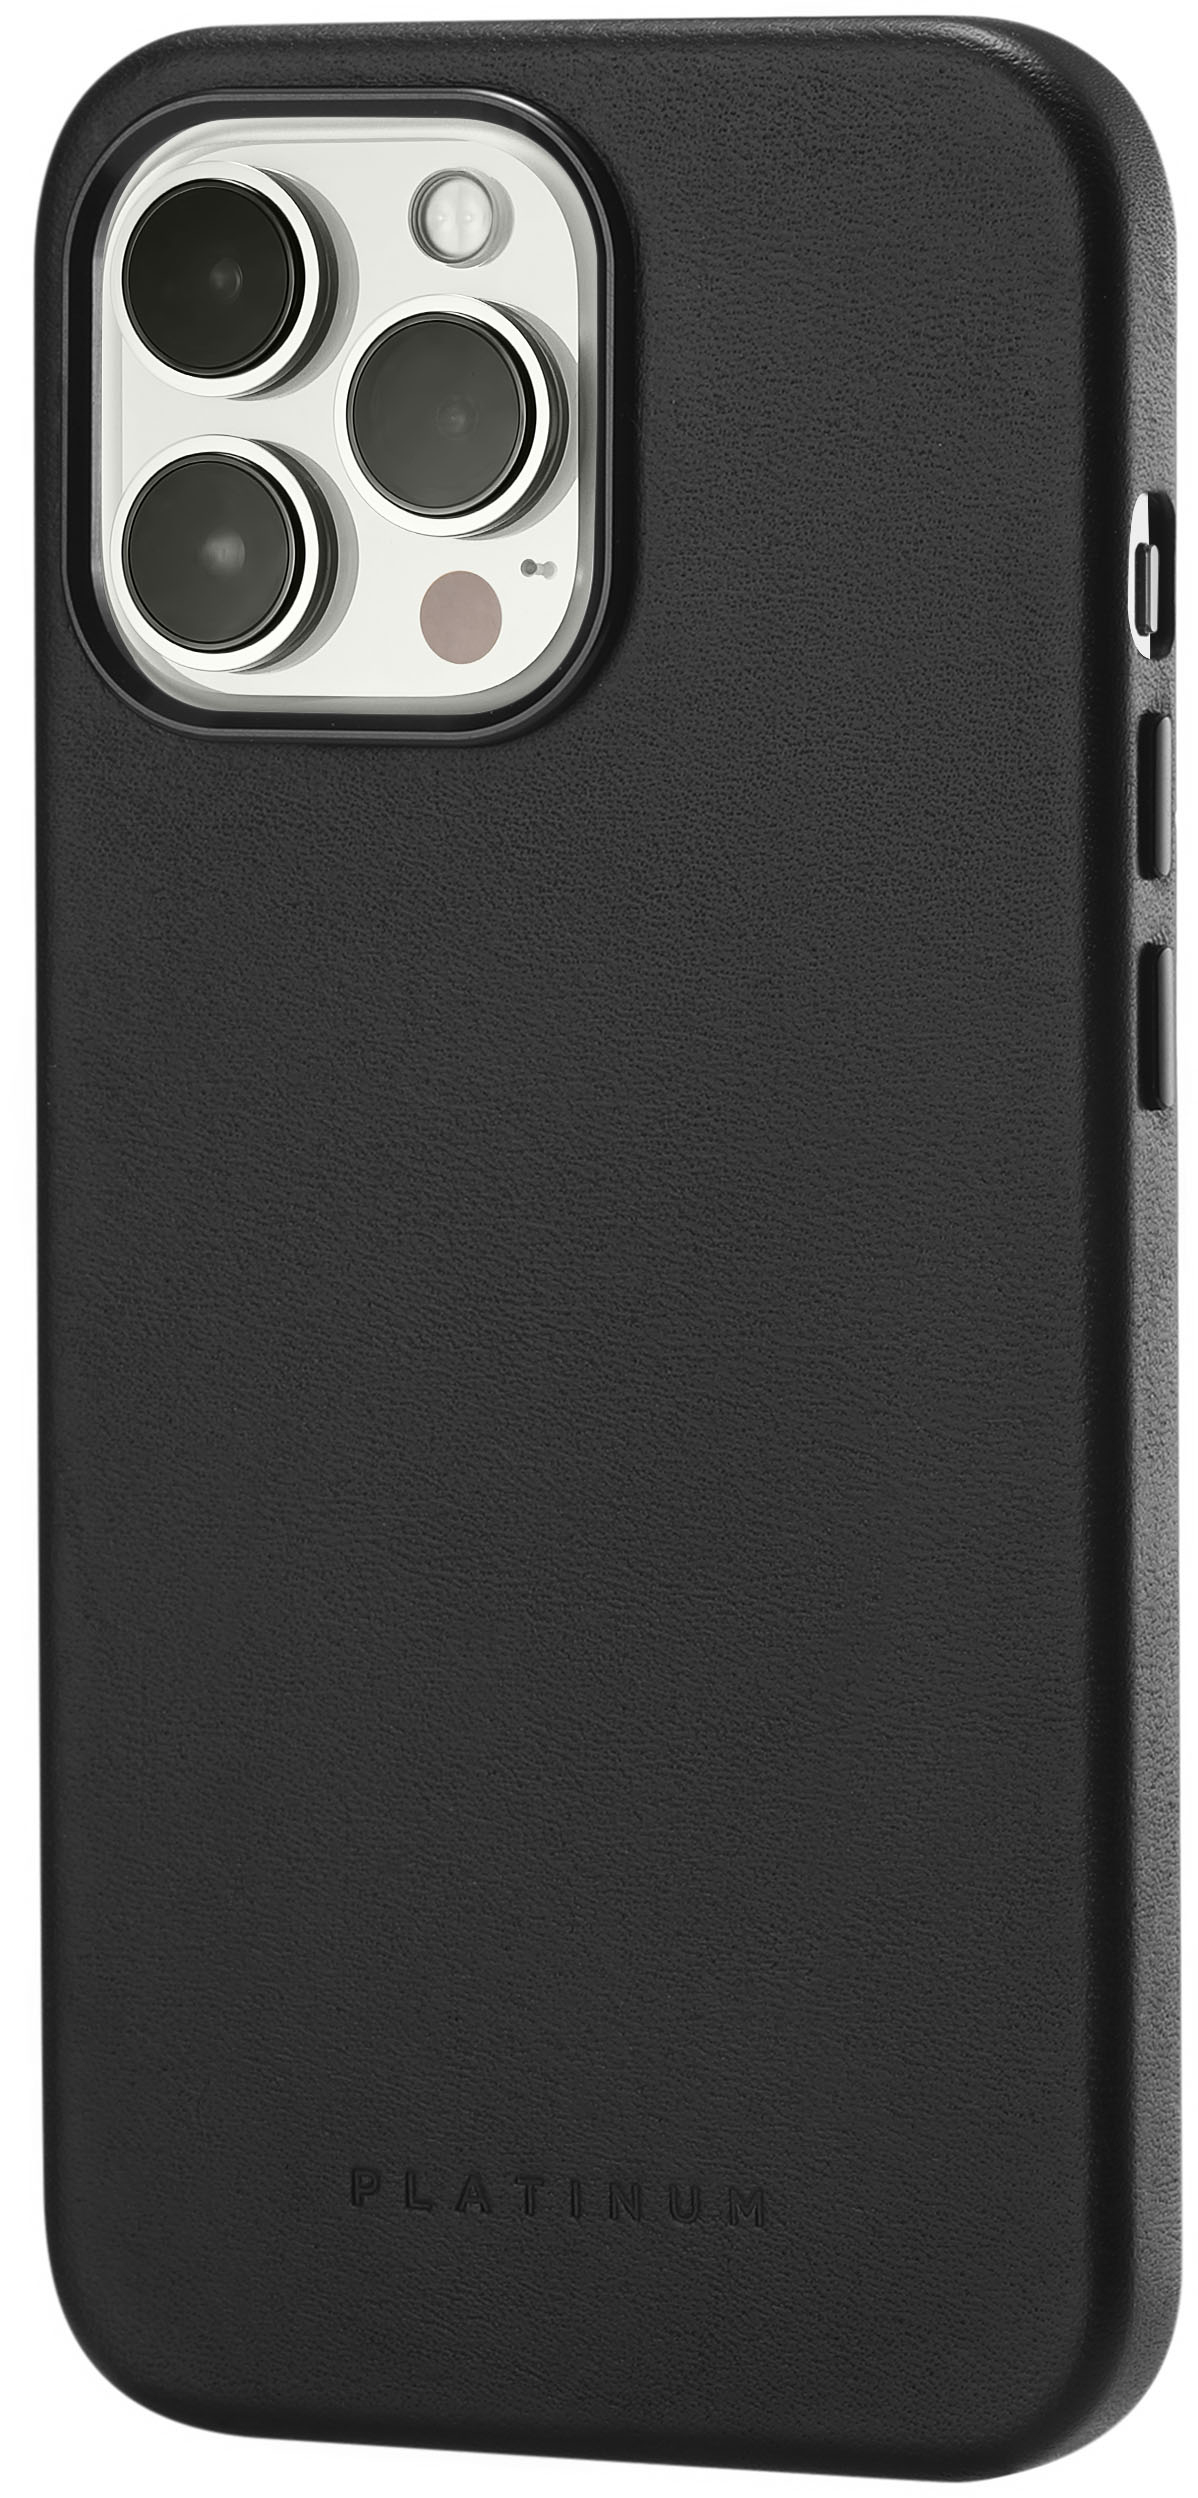 Leather Phone Case, Tpu Phone Case, Leather Cover